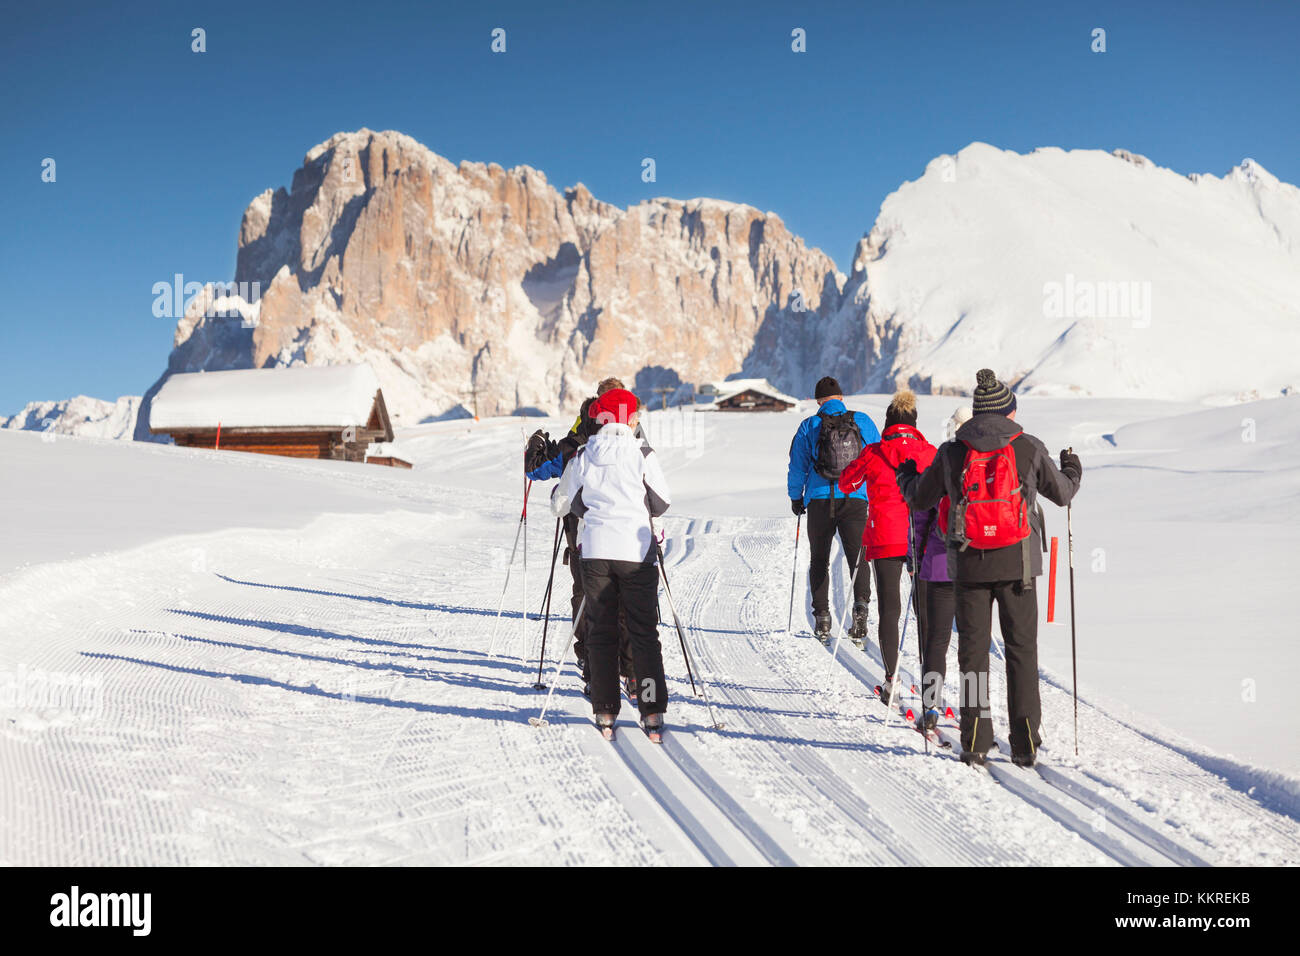 a group of skiers are going with the cross country skies with the langkofel Group in the background, Bolzano province, South Tyrol, Trentino Alto Adige, Italy Stock Photo